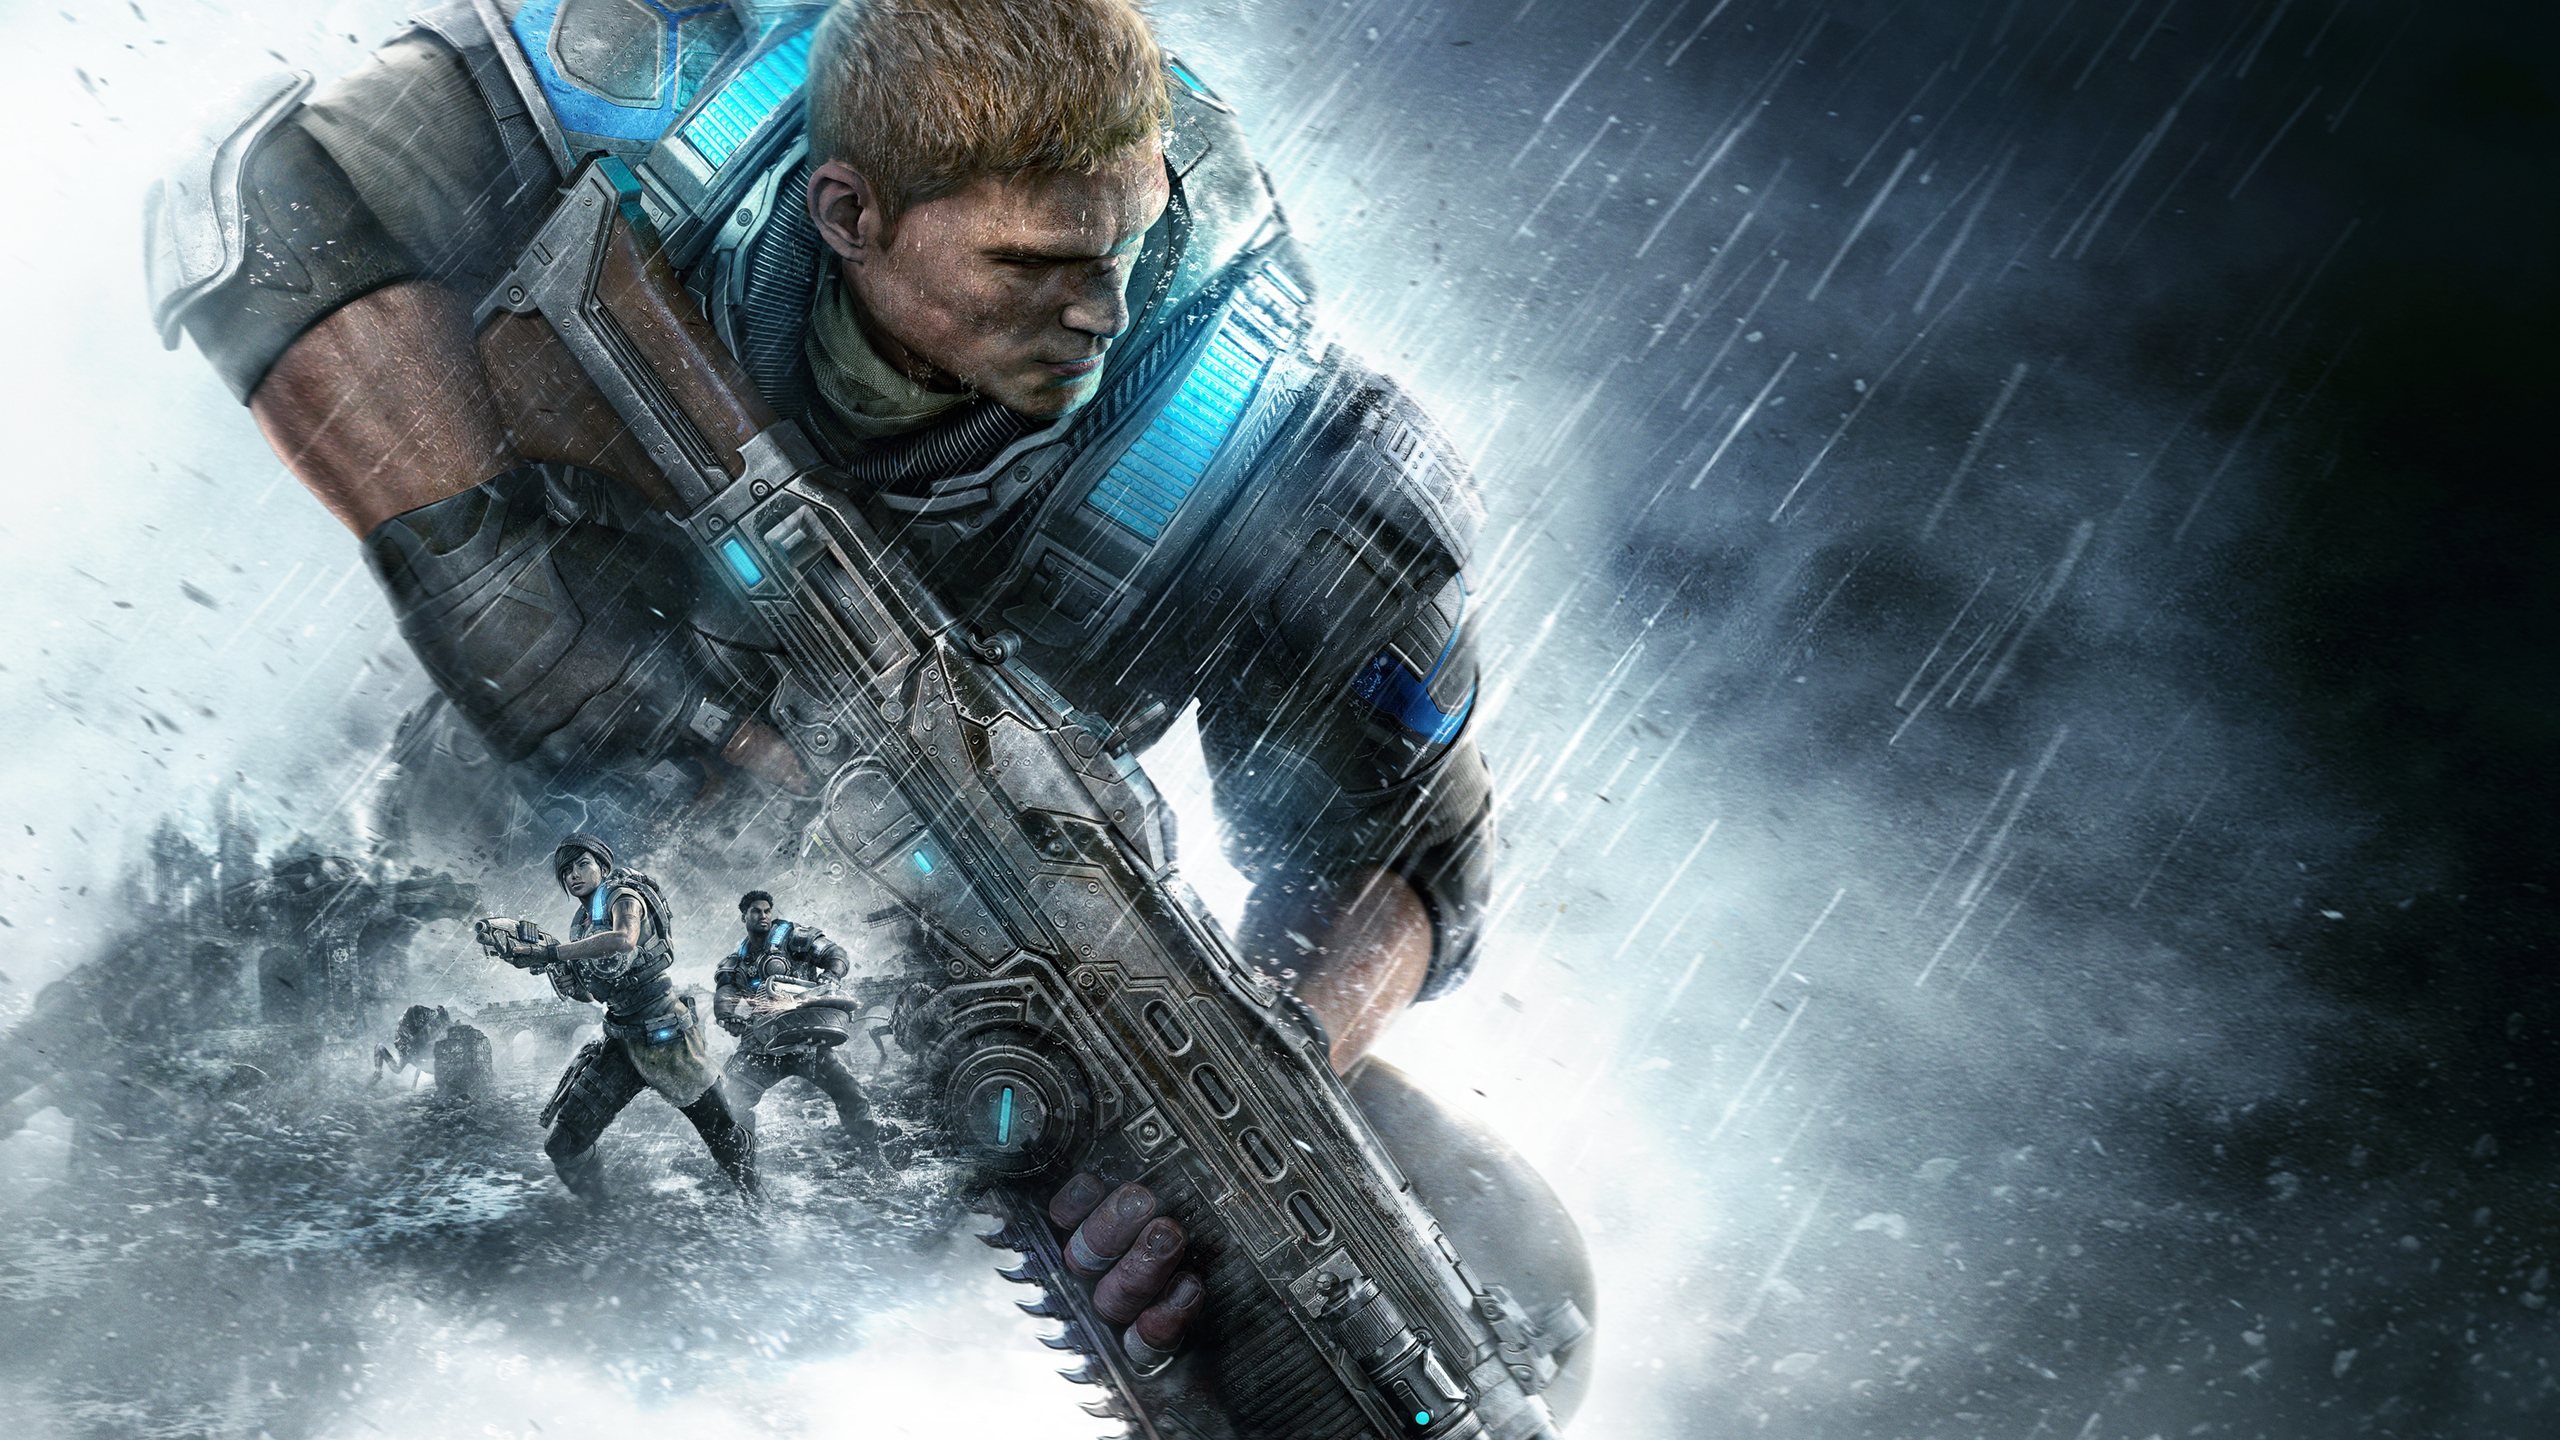 General 2560x1440 Gears of War 4 Gears of War video games video game characters